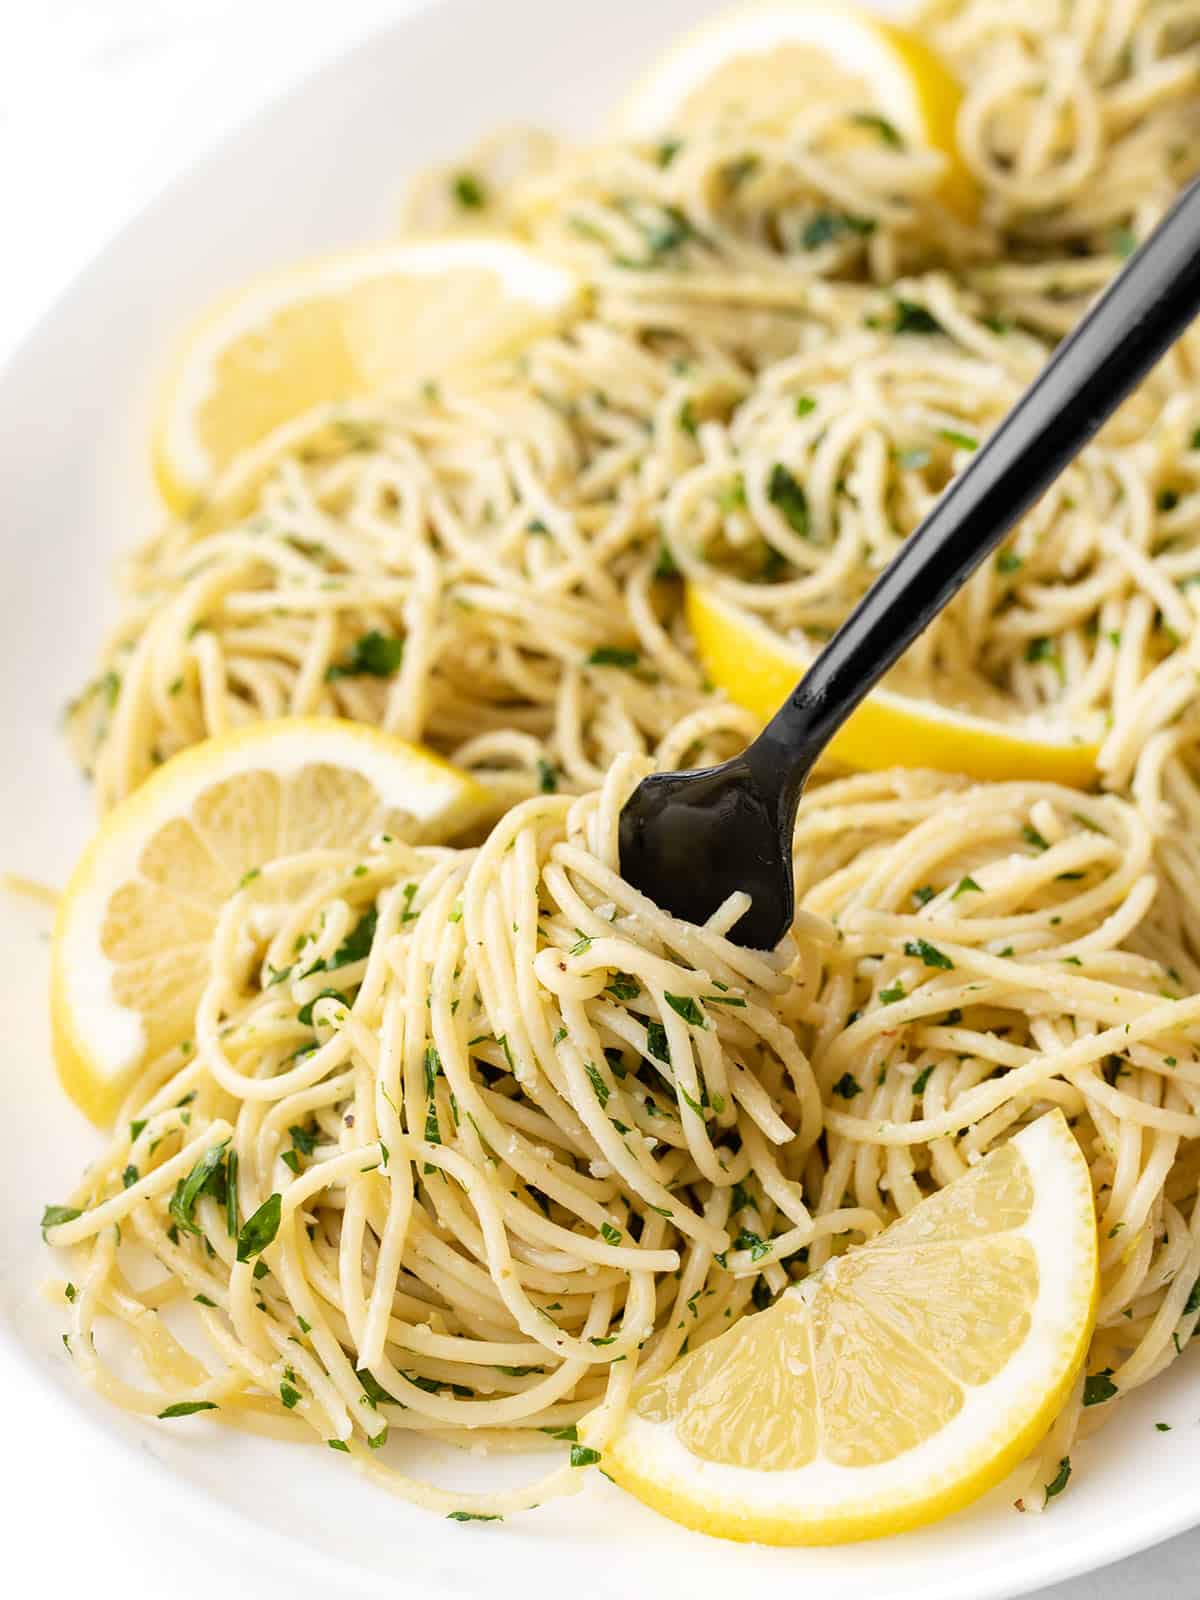 Close up of a fork twirling some of the lemon parsley pasta on a platter with sliced lemons as garnish